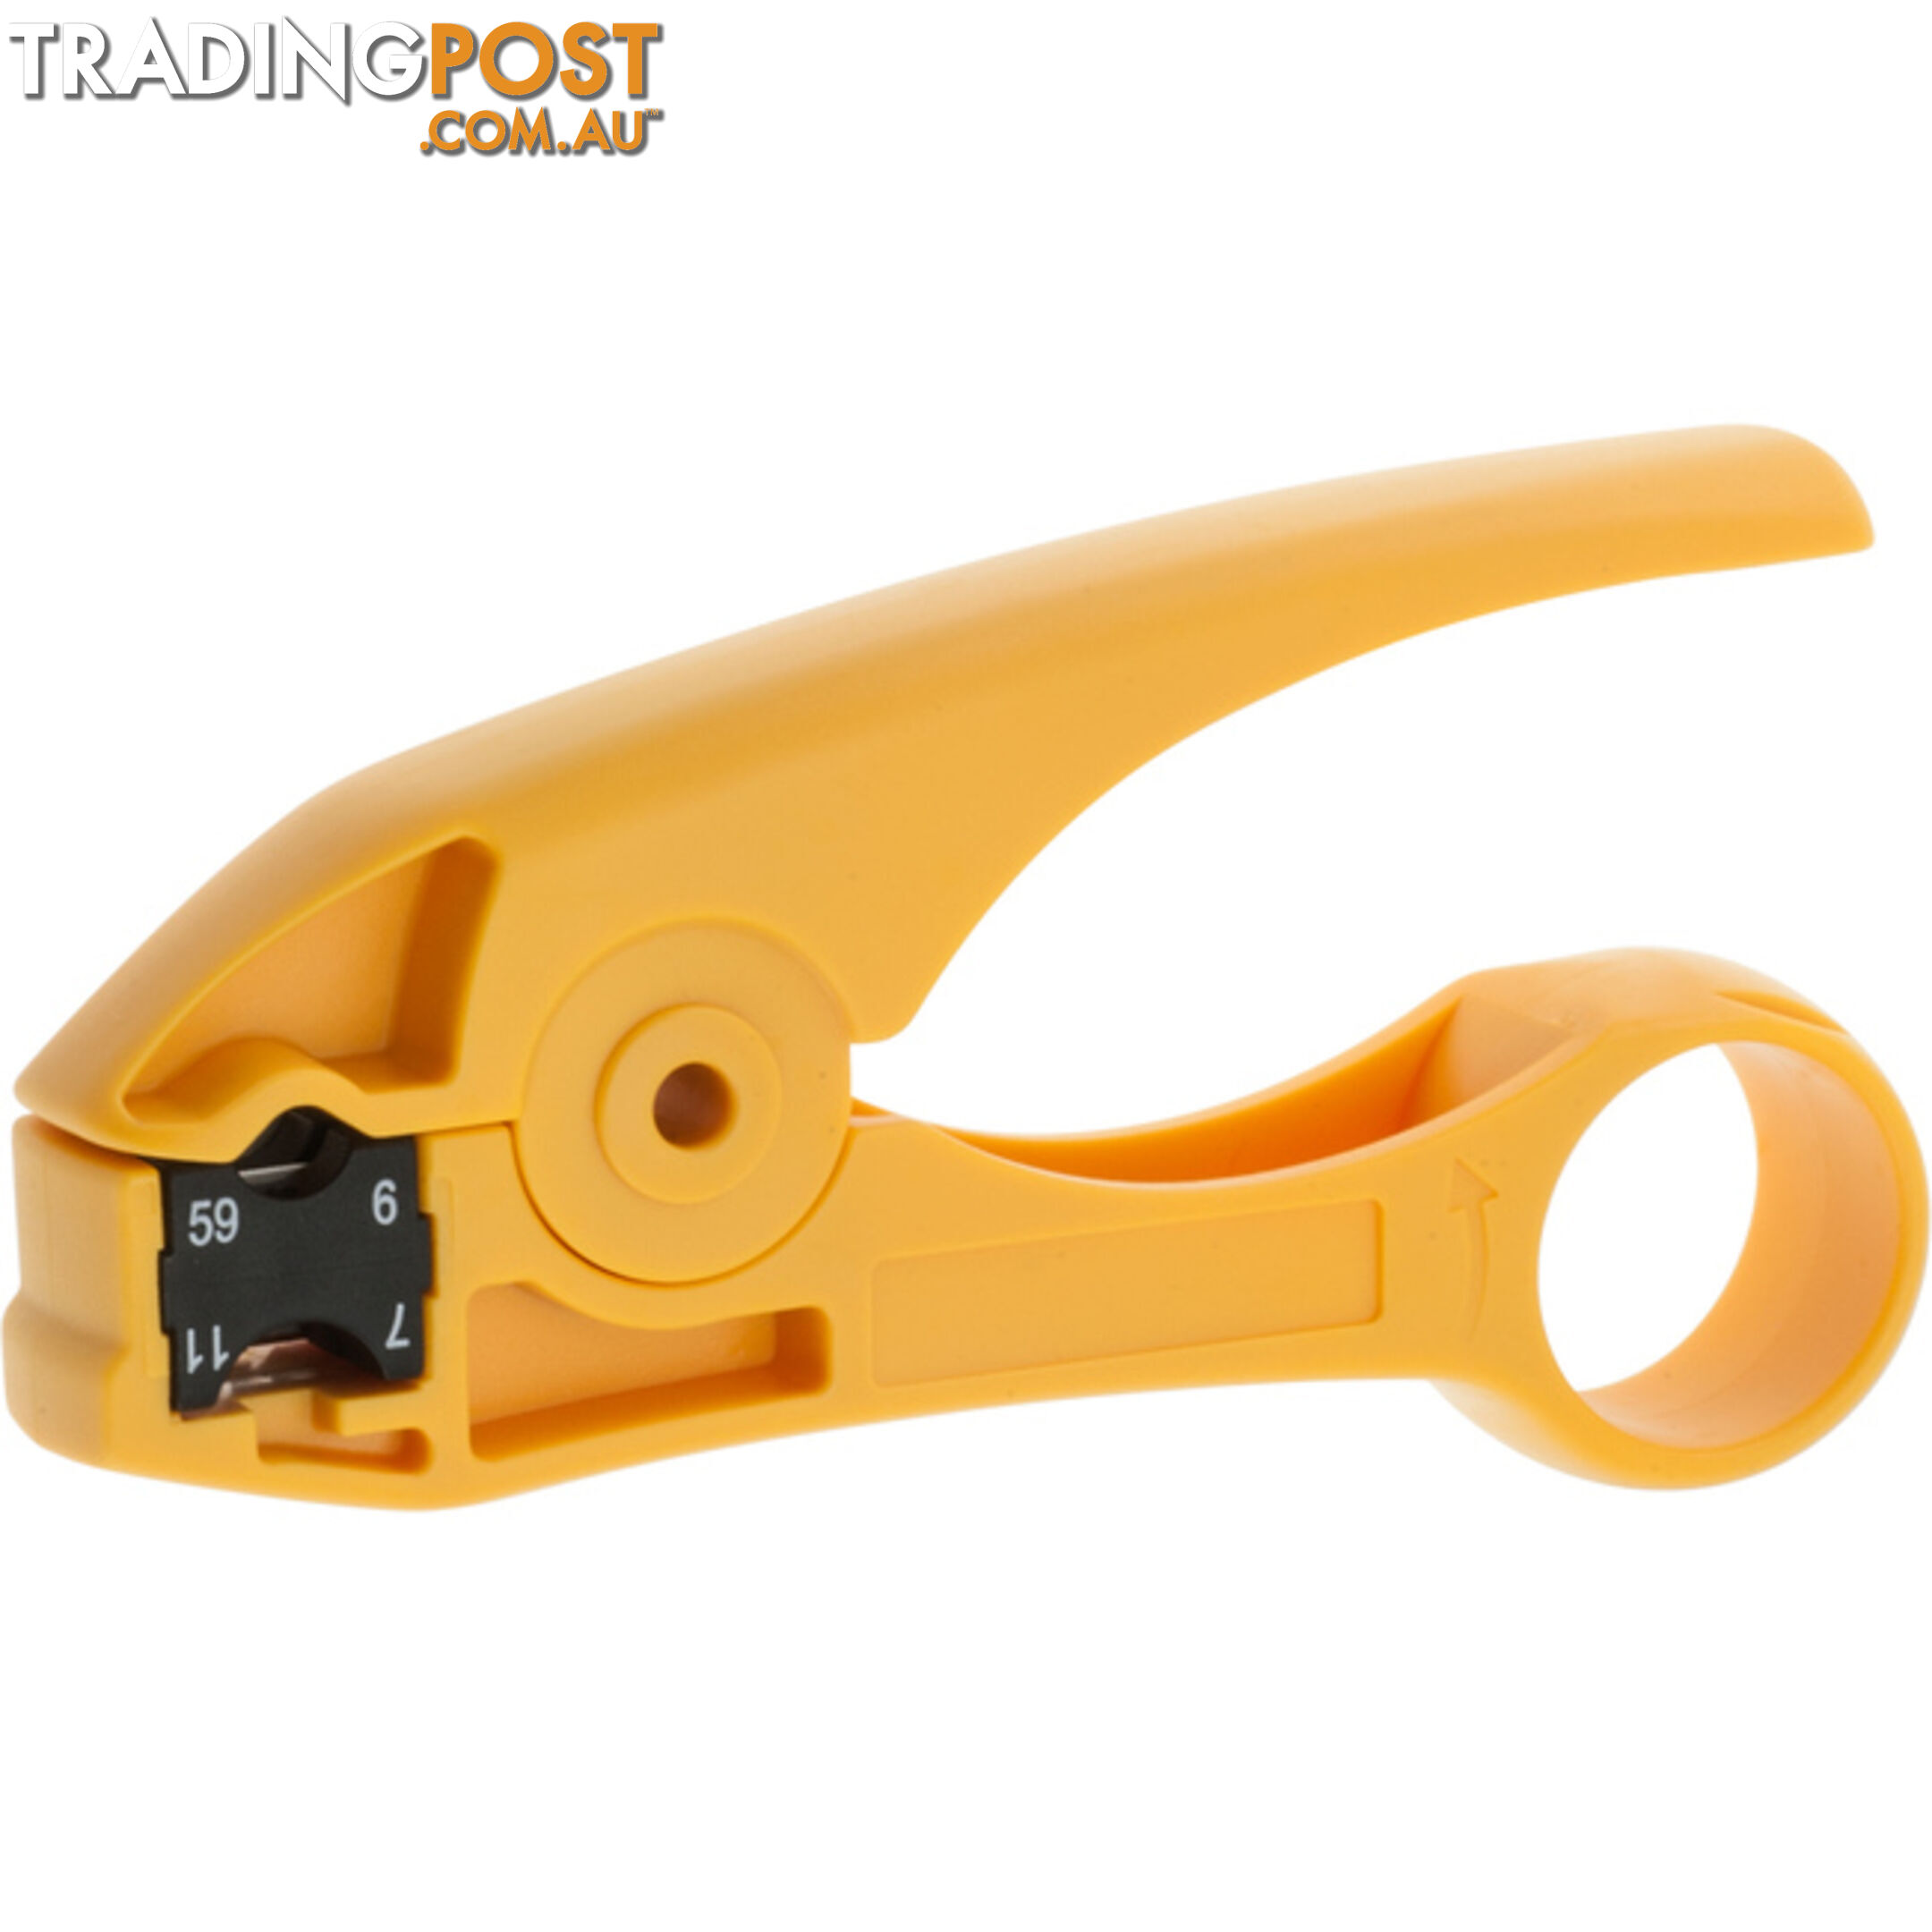 HT351 2 BLADE COAXIAL CABLE STRIPPER RG59/6/11/7